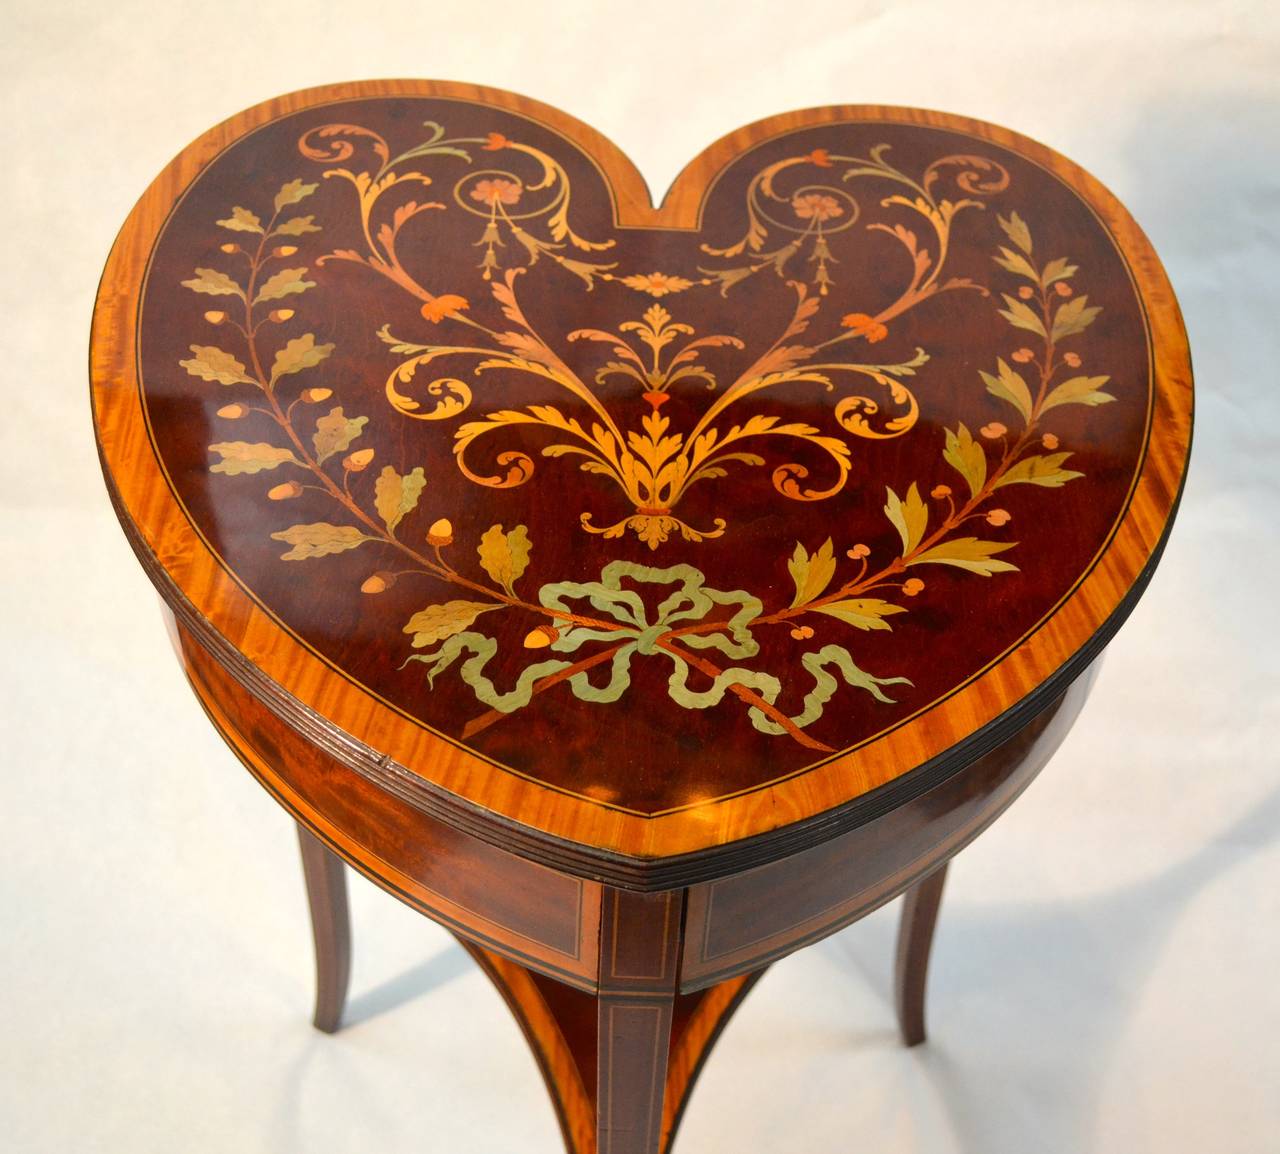 A unusual heart shaped table in mahogany; the top banded in satinwood and inlaid with various exotic woods in the shape of garlands, laurel and berries, and arabesques. Below the top are two 'secret' drawers that open sideways revealing velvet lined